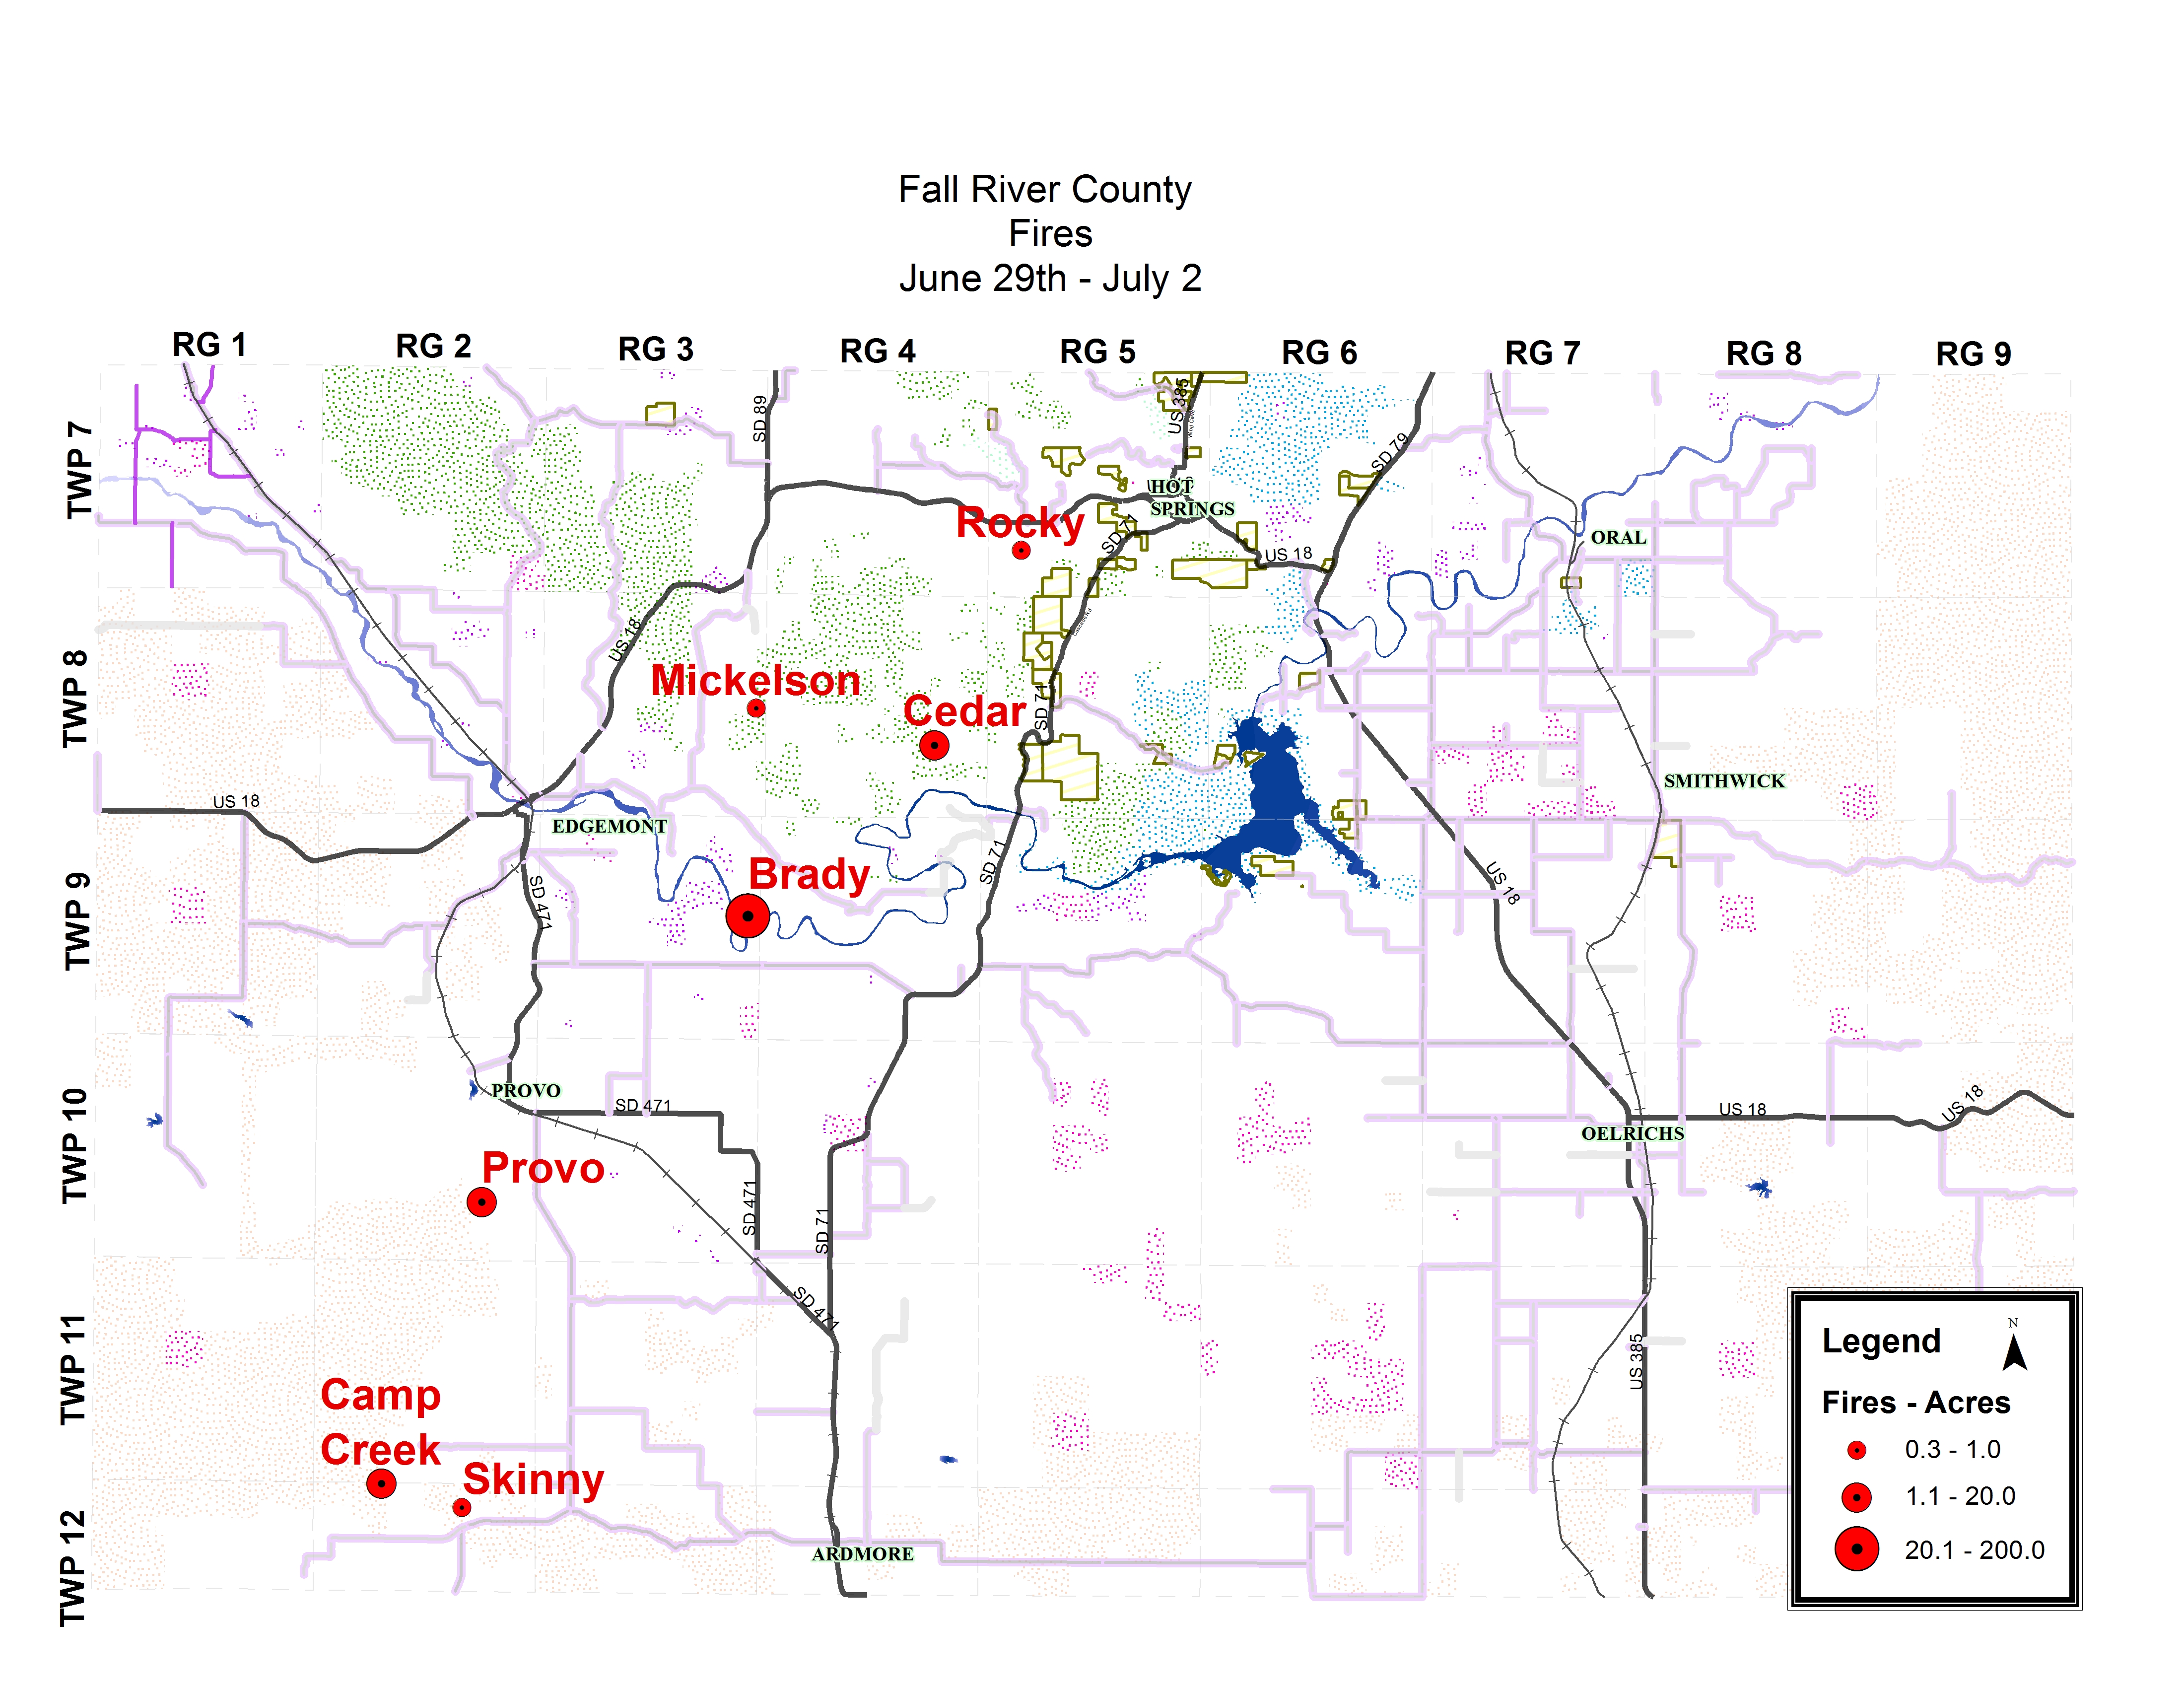 Map - Fall River County Fires June 29th to July 2nd 2017